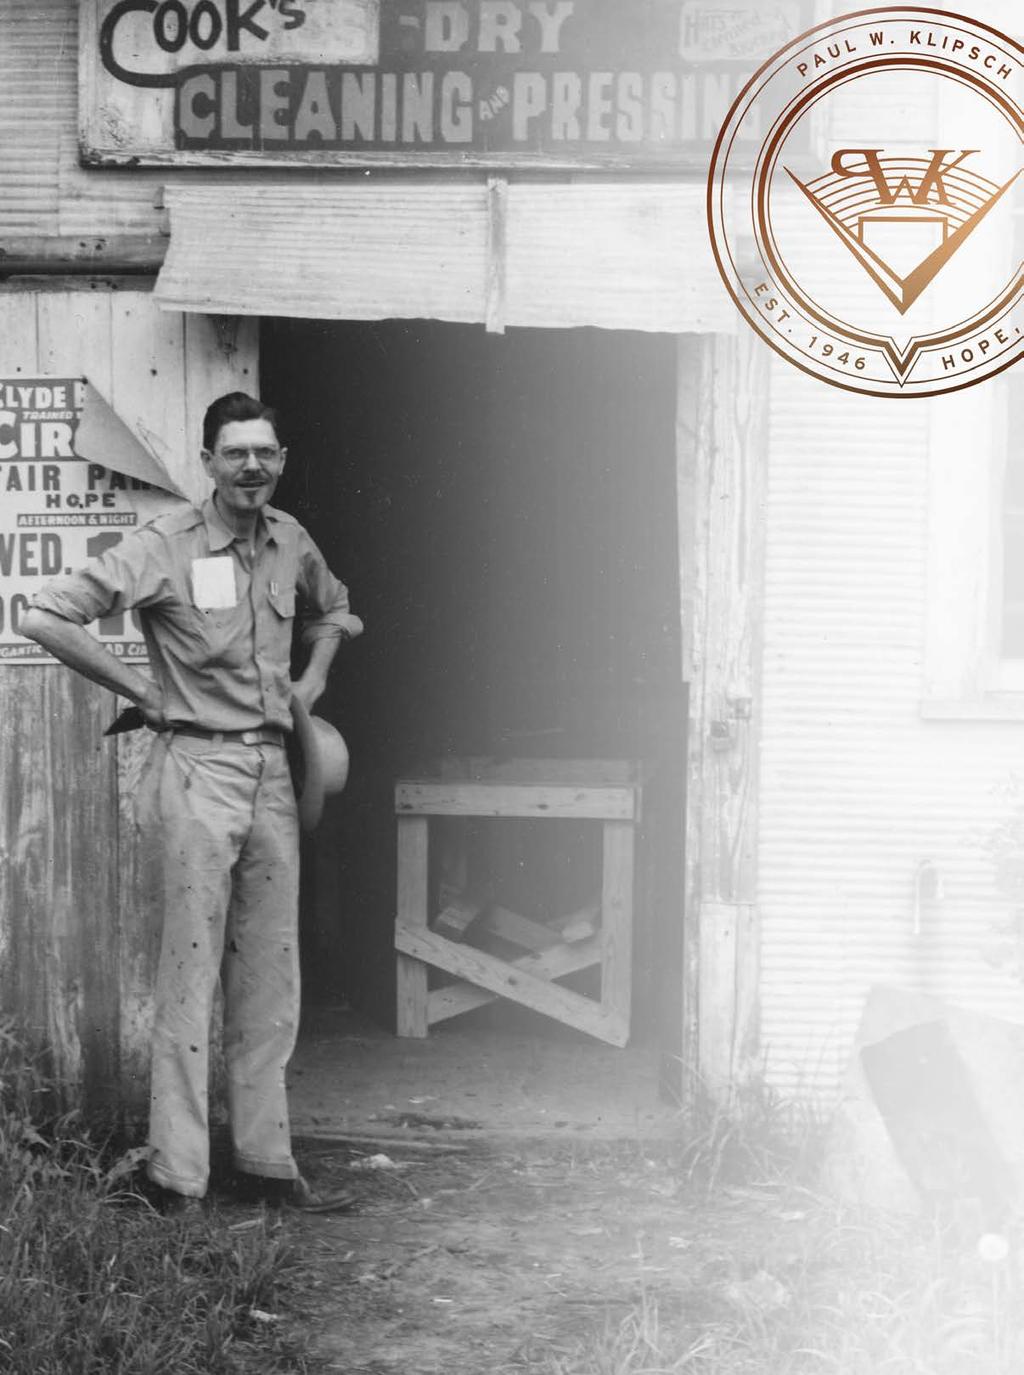 71 YEARS AGO THE GENESIS OF SOMETHING VERY SPECIAL OCCURRED IN A TINY TIN SHED IN HOPE, ARKANSAS In 1946 Paul W.